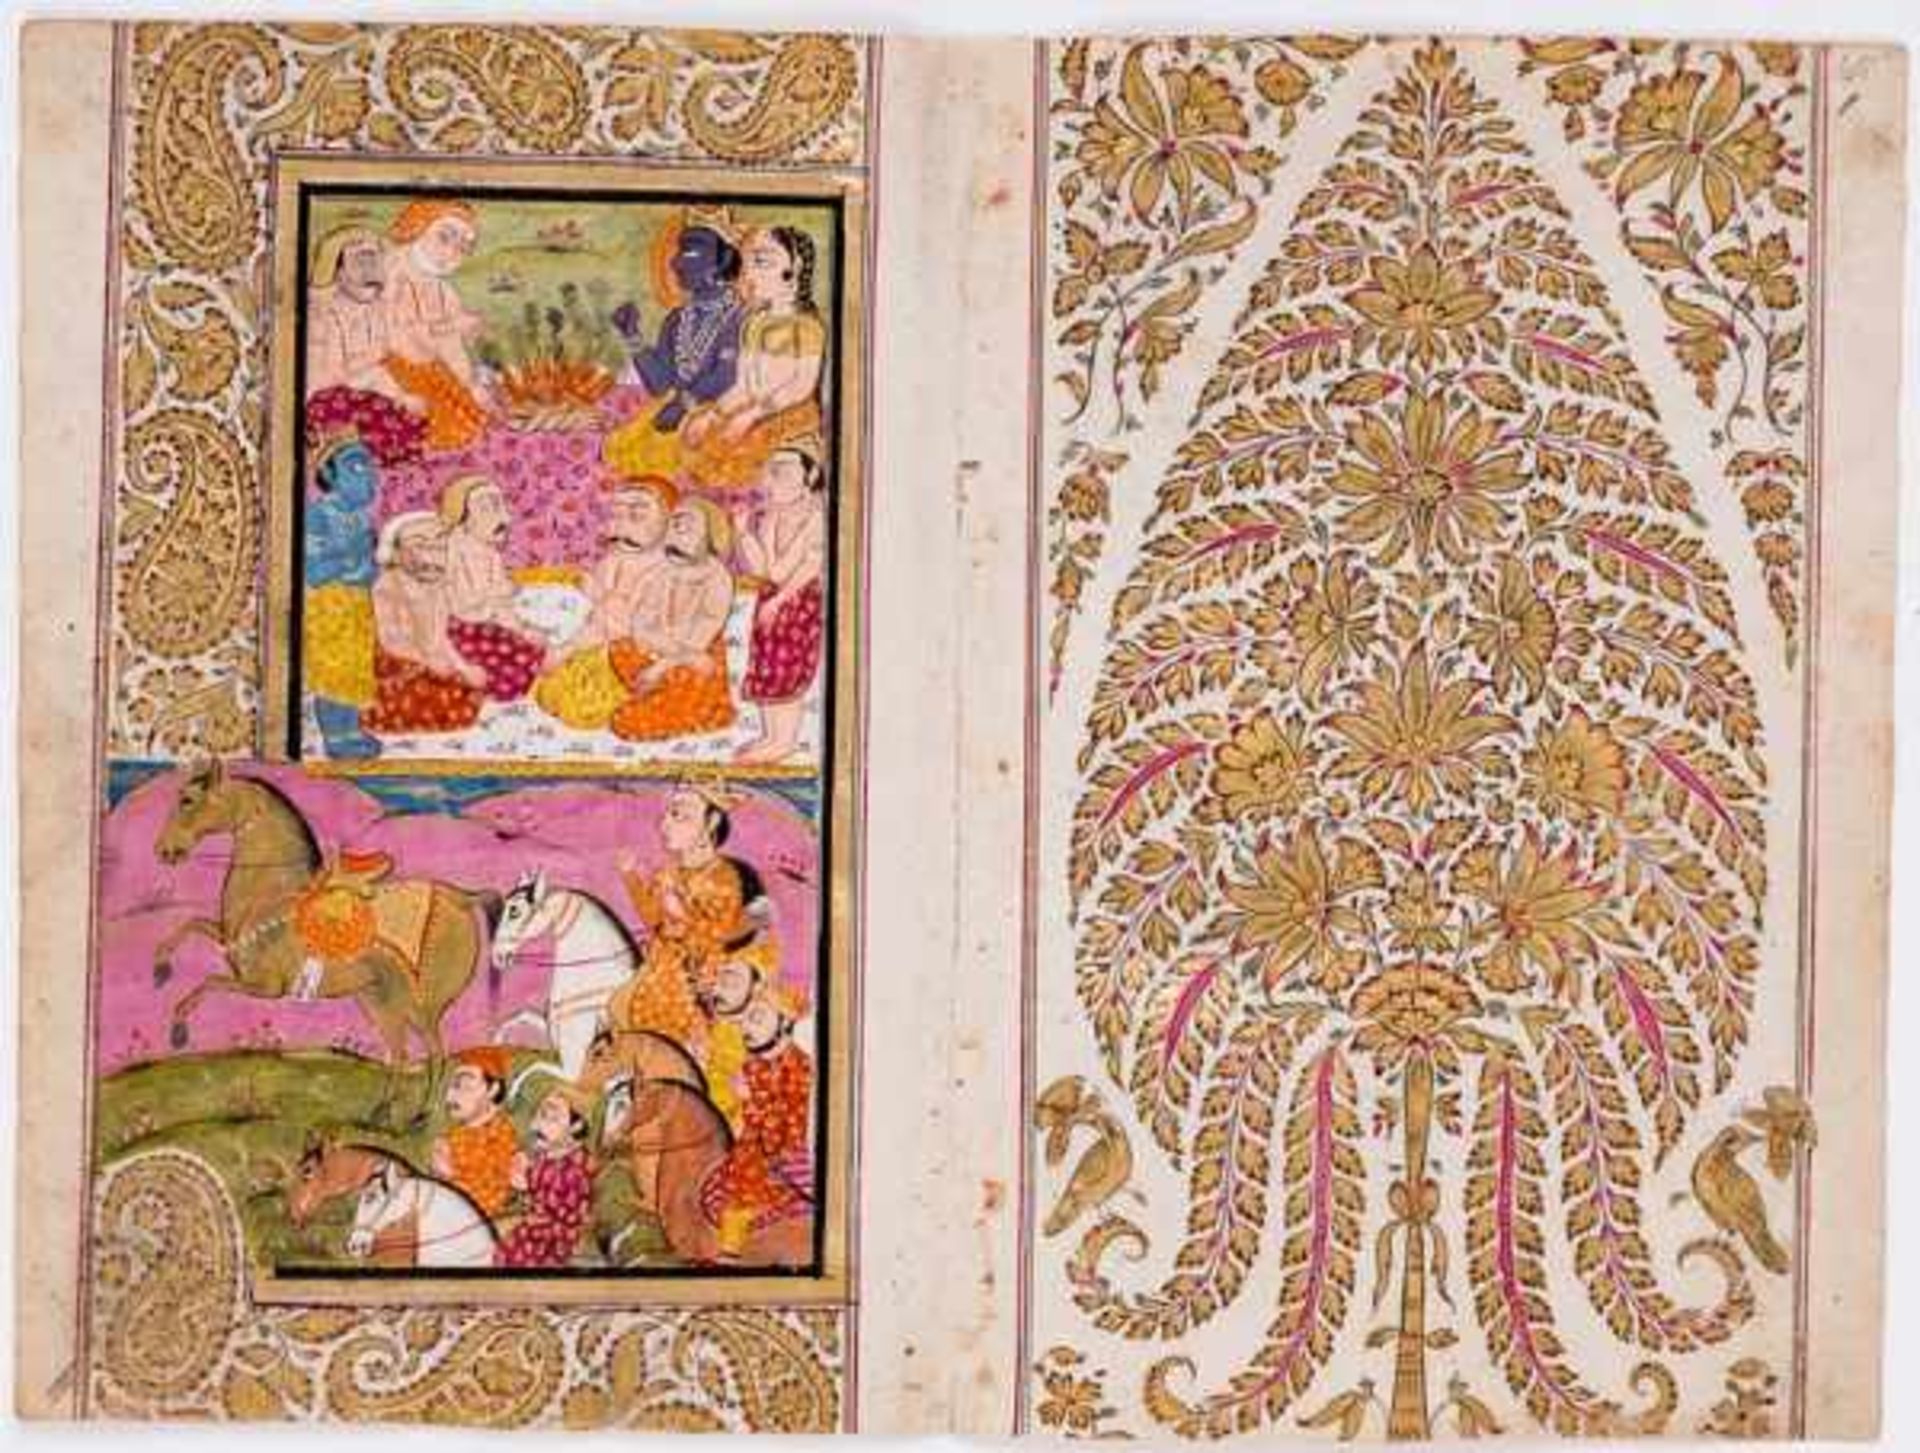 KRISHNA, RADHA AND RAMA Miniature painting. Paint and gold on paper. Northern India, Kashmir, 19th